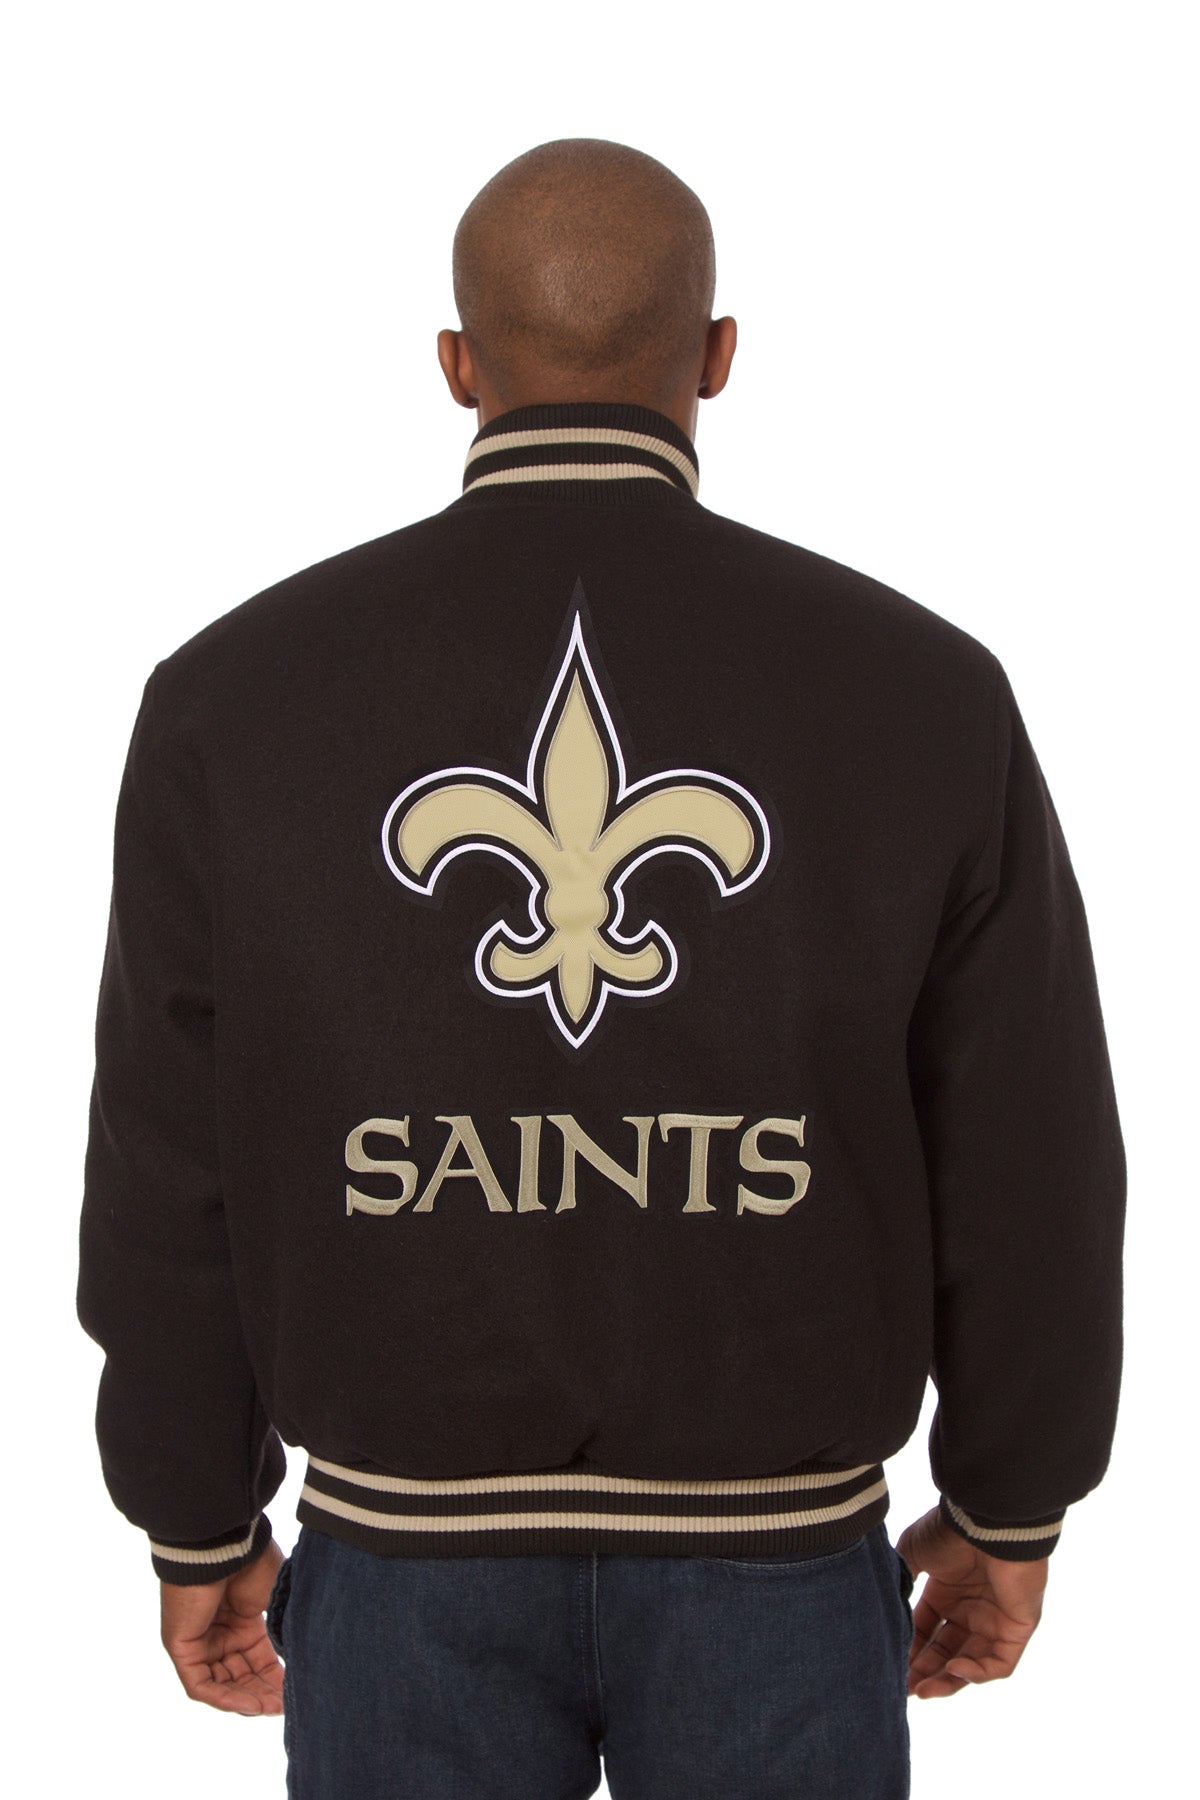 New Orleans Saints Embroidered Wool Jacket